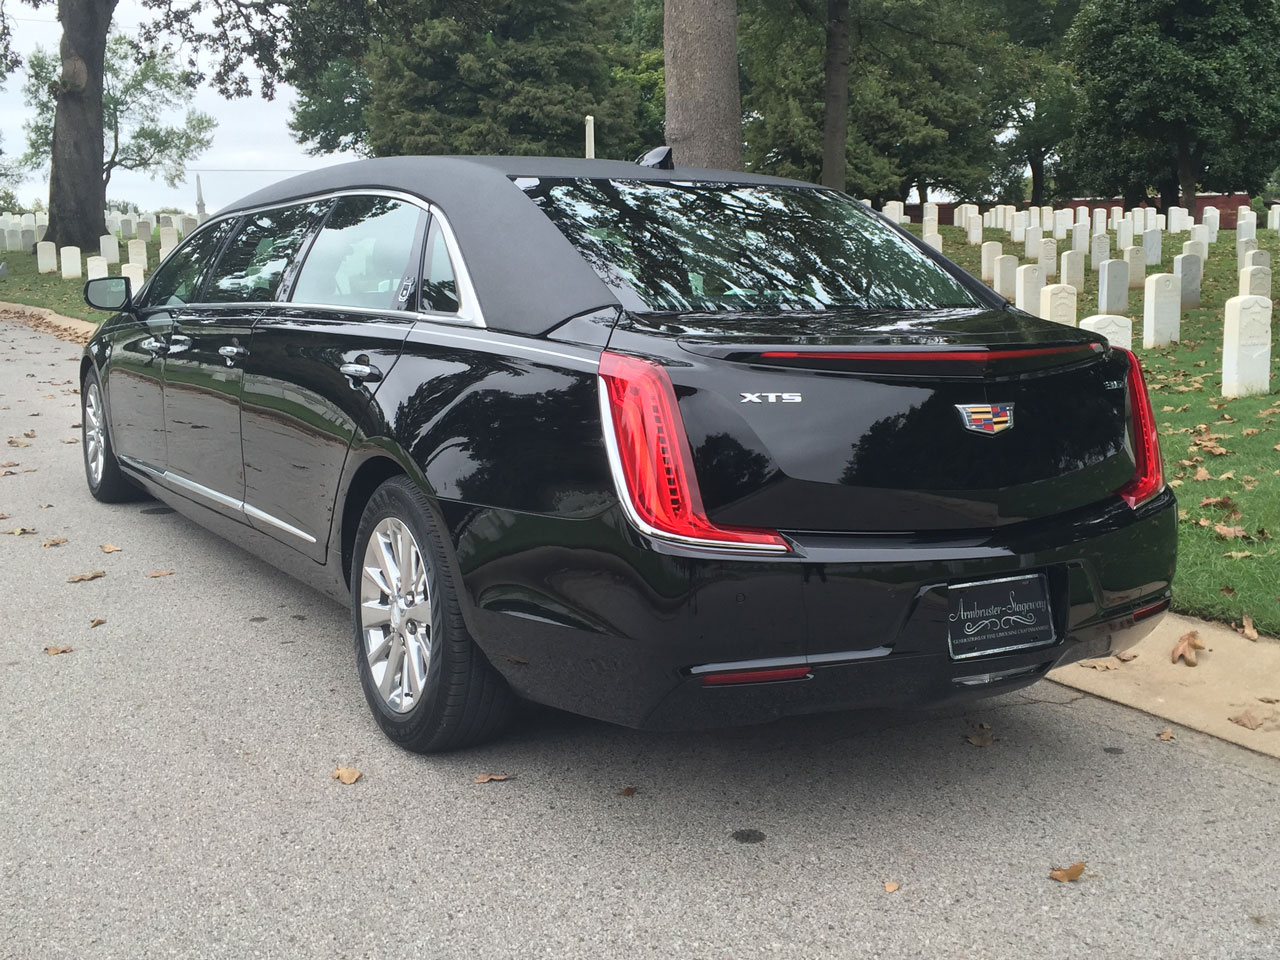 2019 Armbruster Stageway Cadillac L6 52 Stretch Limousine 6